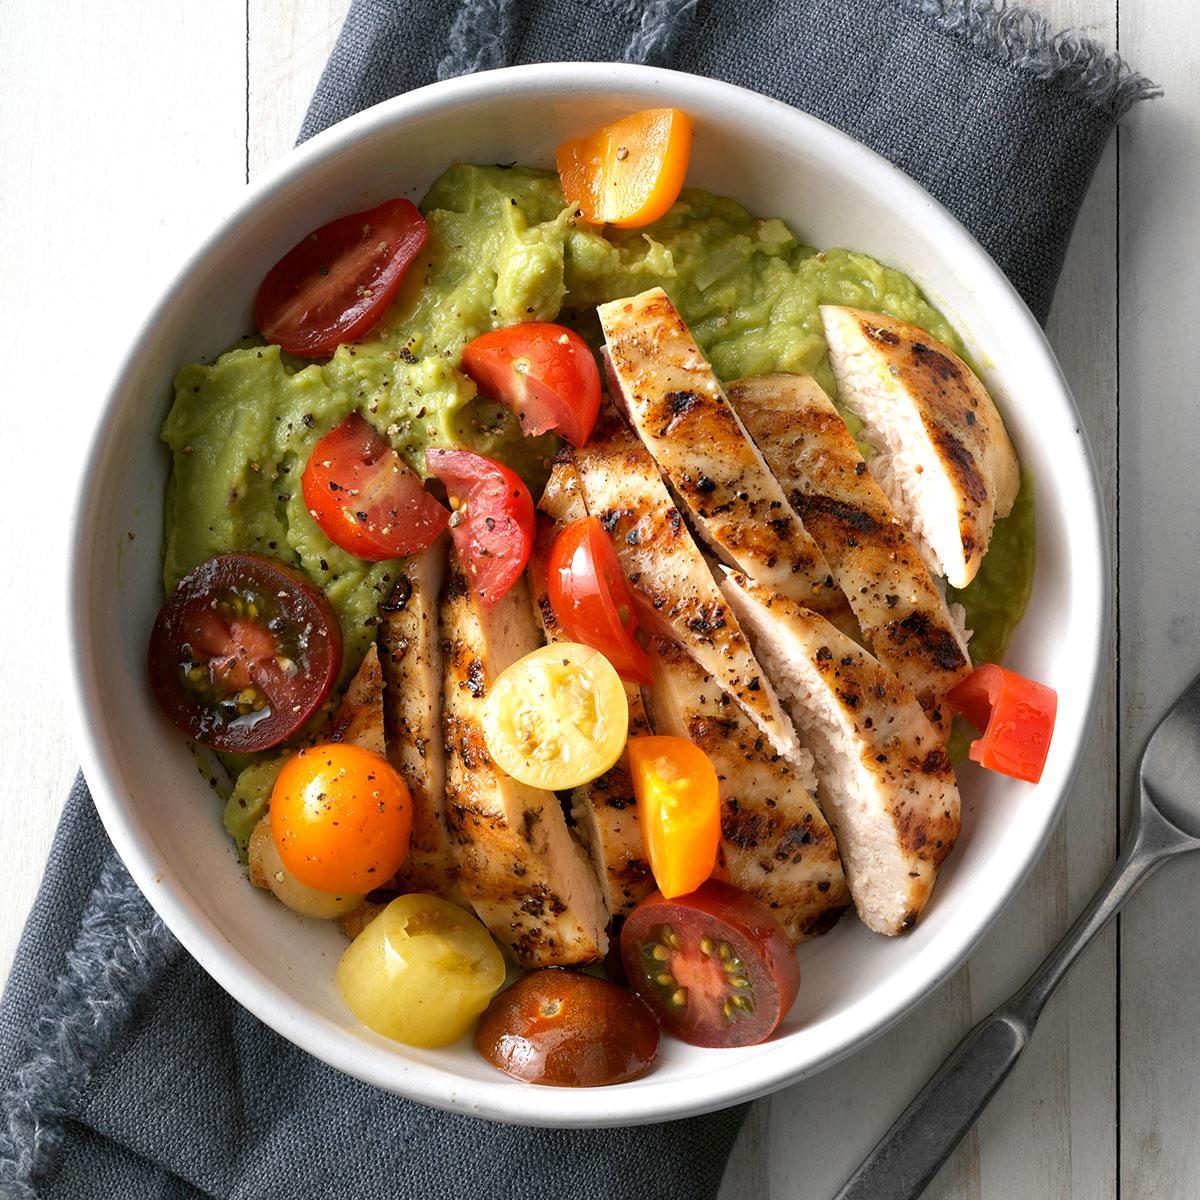 Grilled Chicken And Cherry Tomato Guacamole Exps Tmbstk18 255170 Guacamole C10 29 6b 2